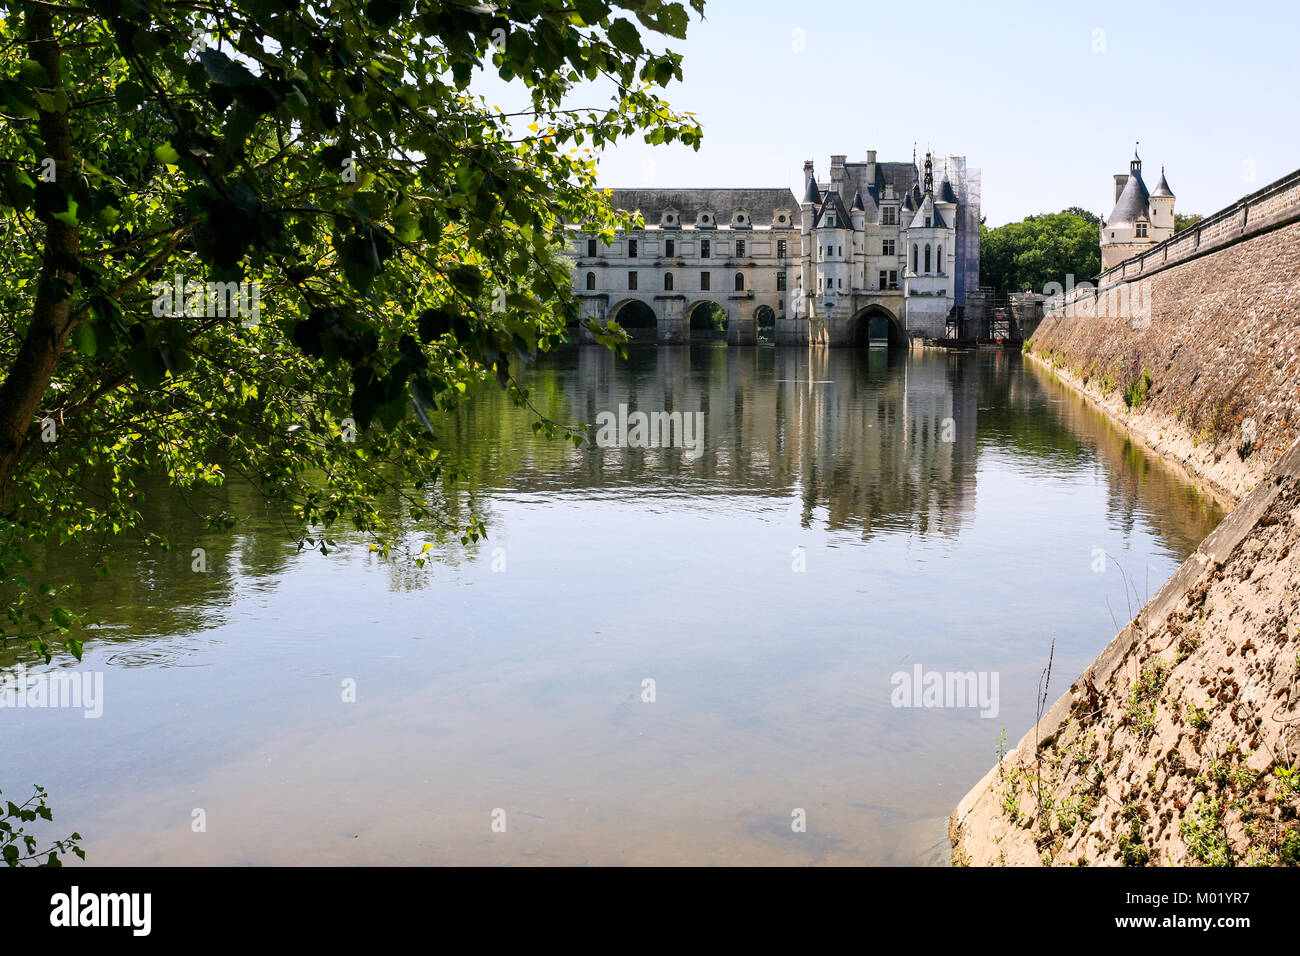 CHENONCEAUX, FRANCE - JULY 8, 2010: view of Chateau de Chenonceau on canal of Cher river. The current palace was built in Indre-et-Loire departement o Stock Photo